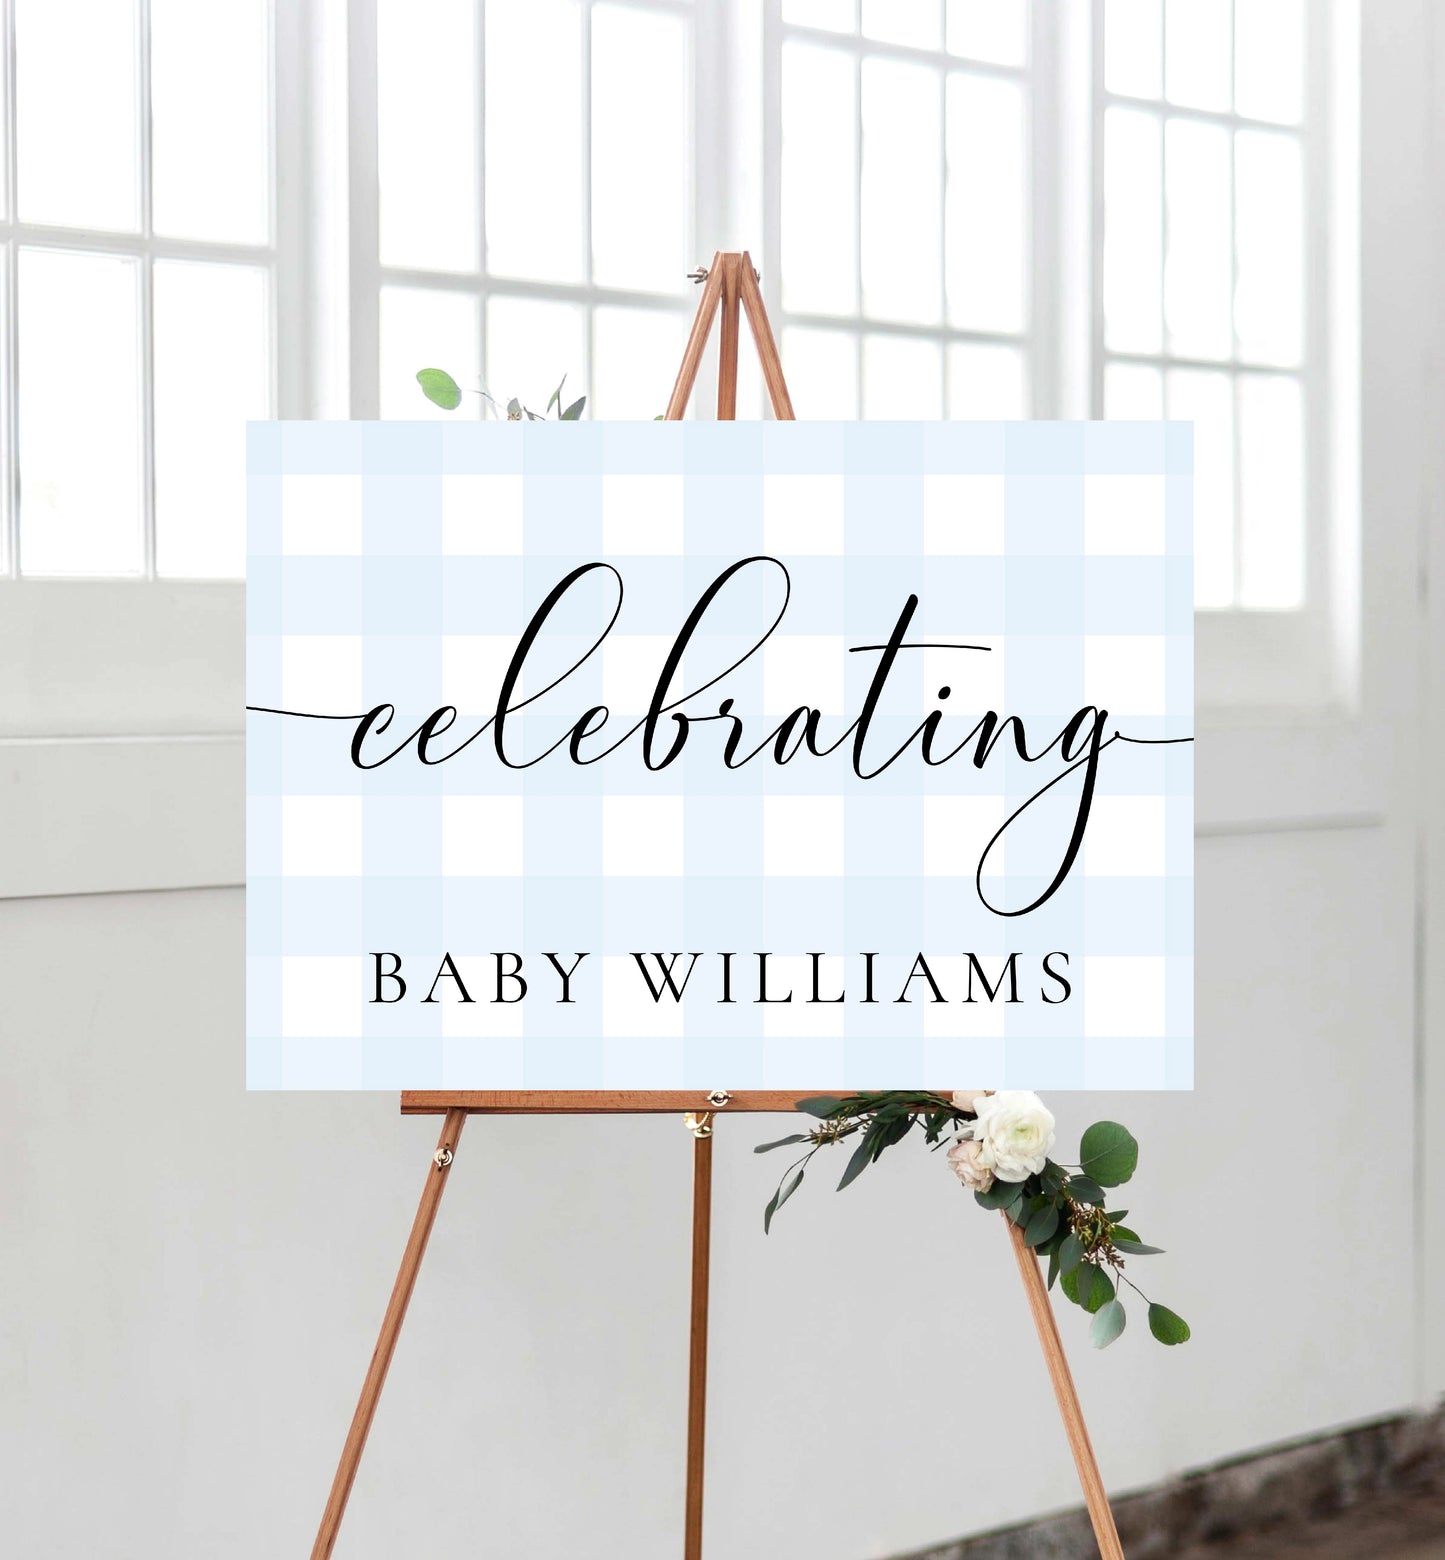 Gingham Blue | Printable Celebrating Welcome Sign Template